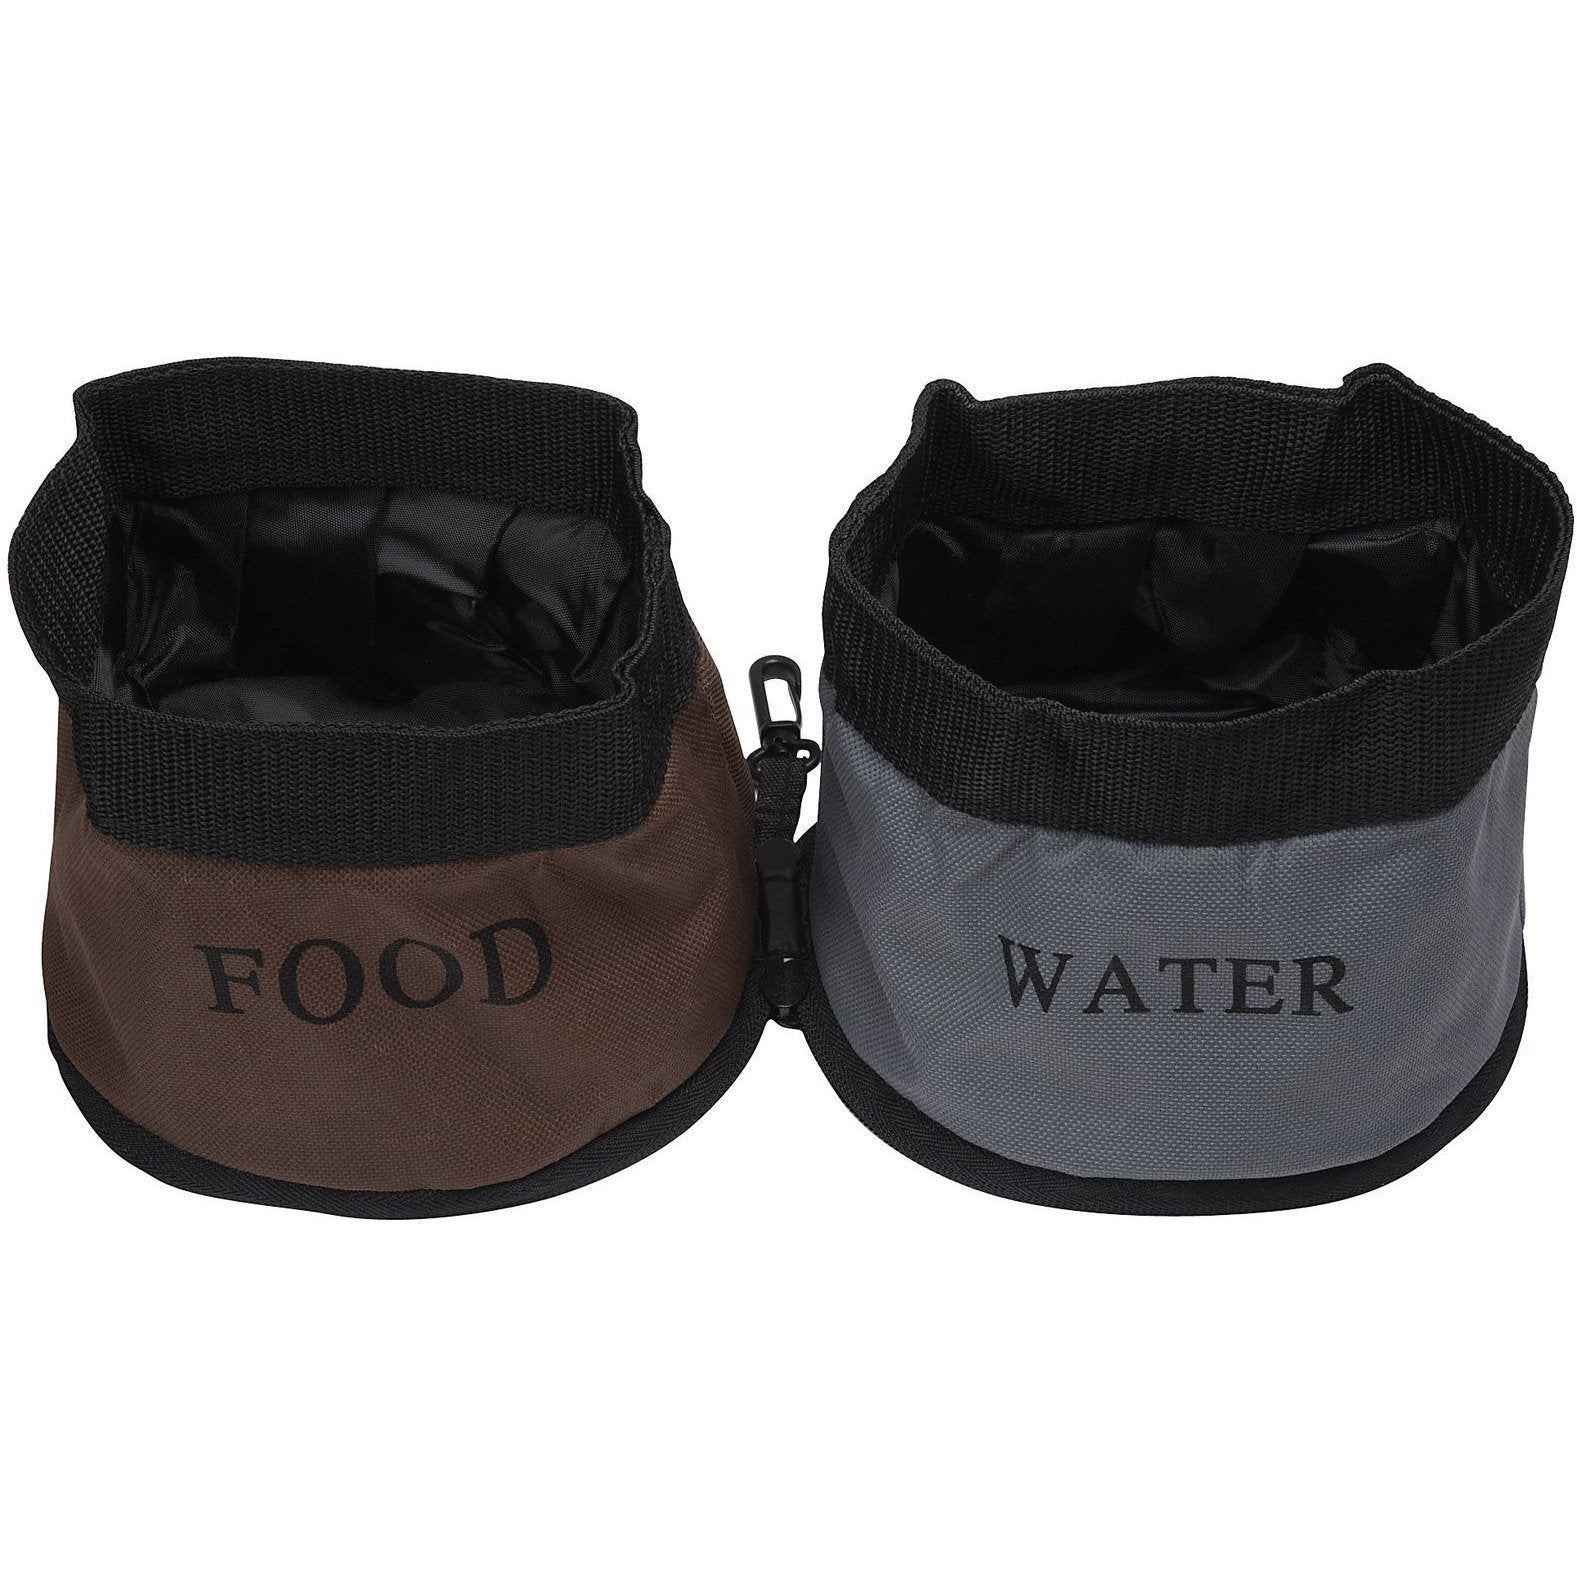 Pet Life ® 'Dual Folding' Food and Water Collapsible Pet Travel Cat and Dog Bowl  